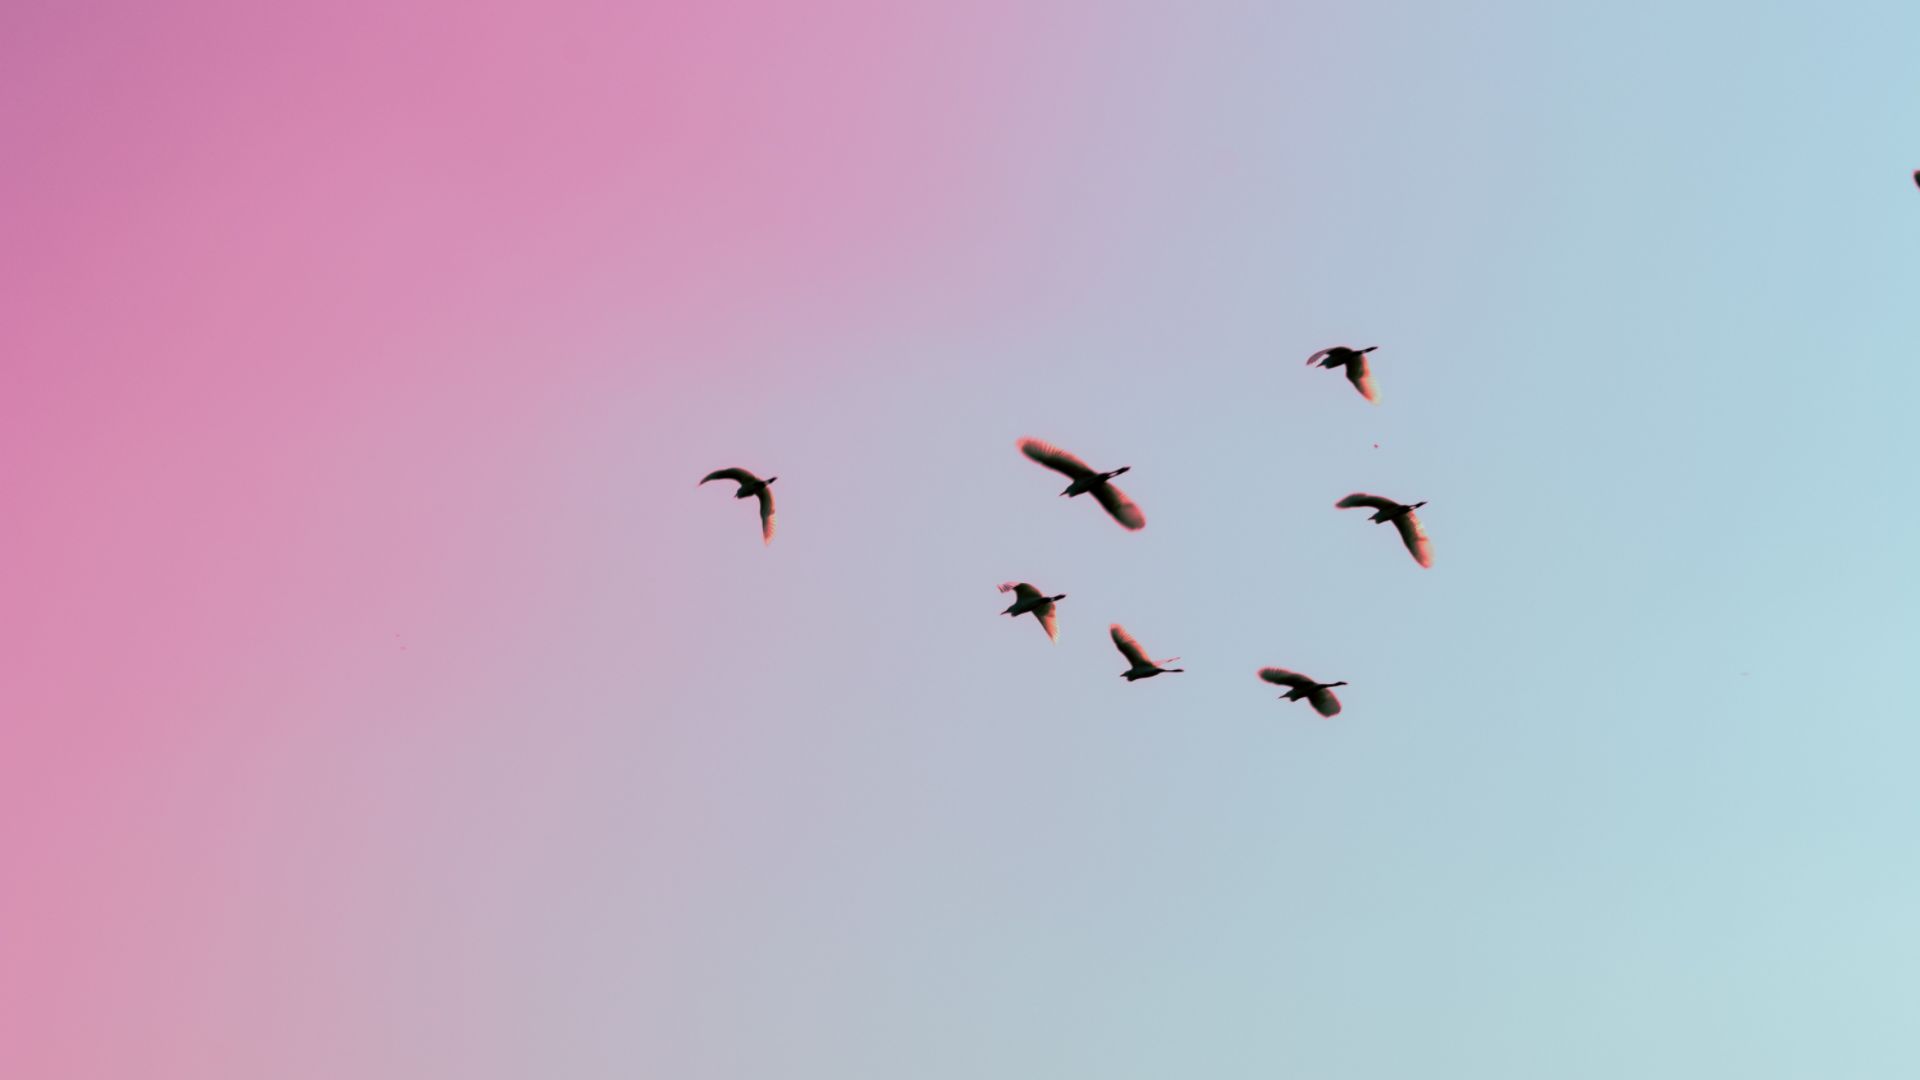 Birds flying in the sky during sunset - 